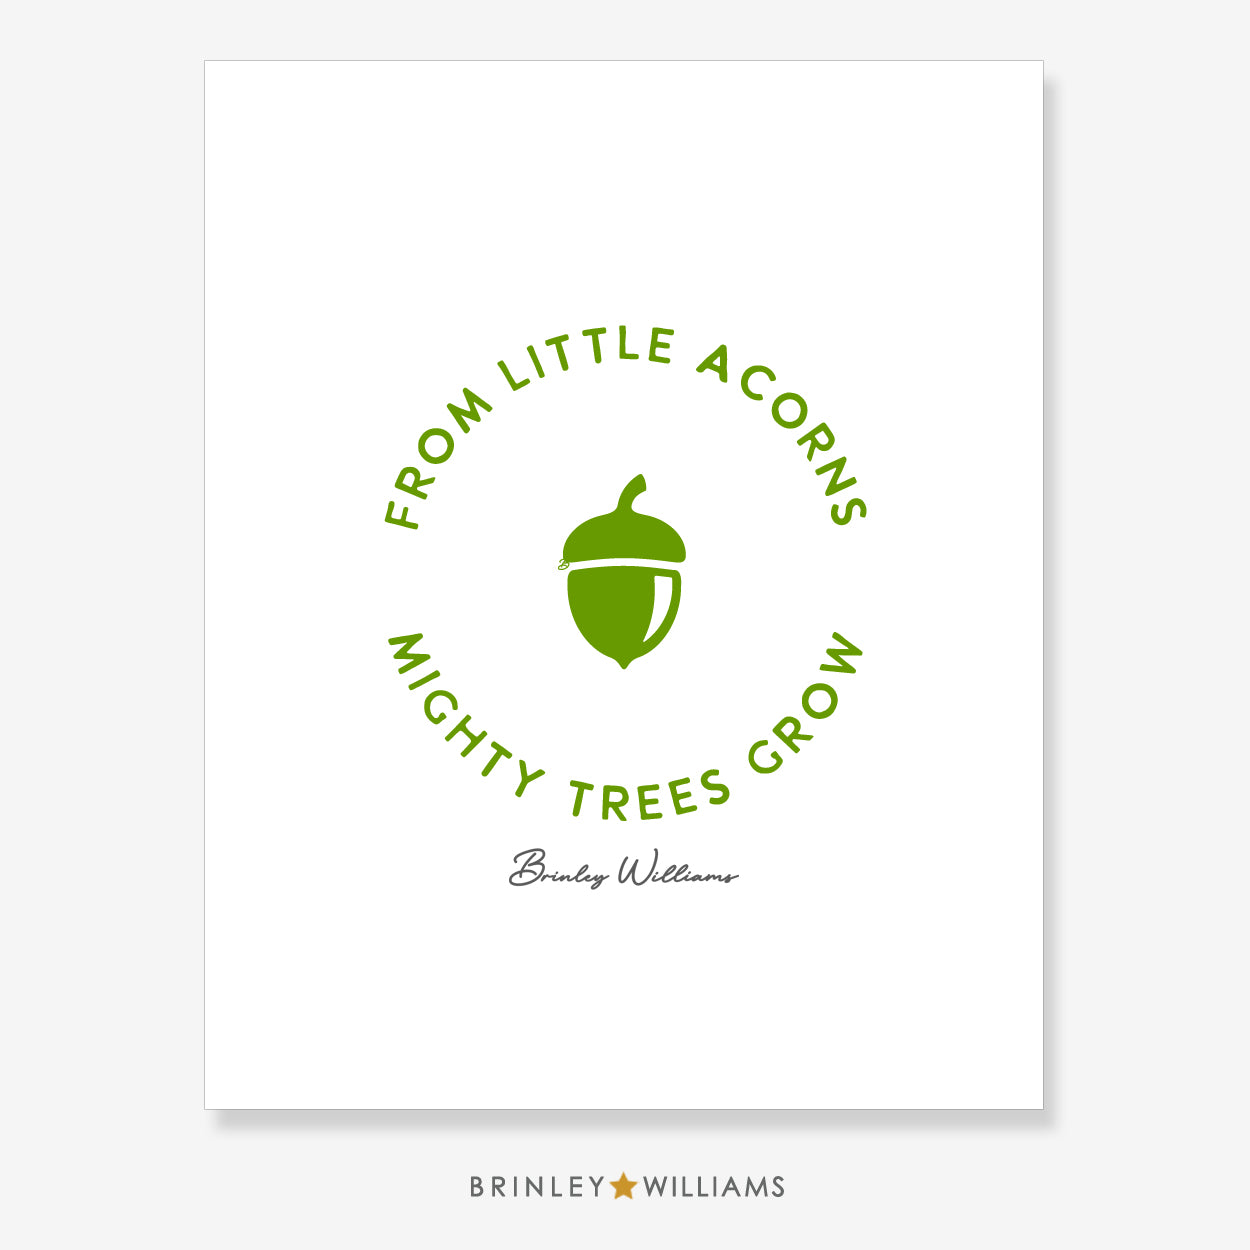 From little acorns mighty trees grow Wall Art Poster - Green